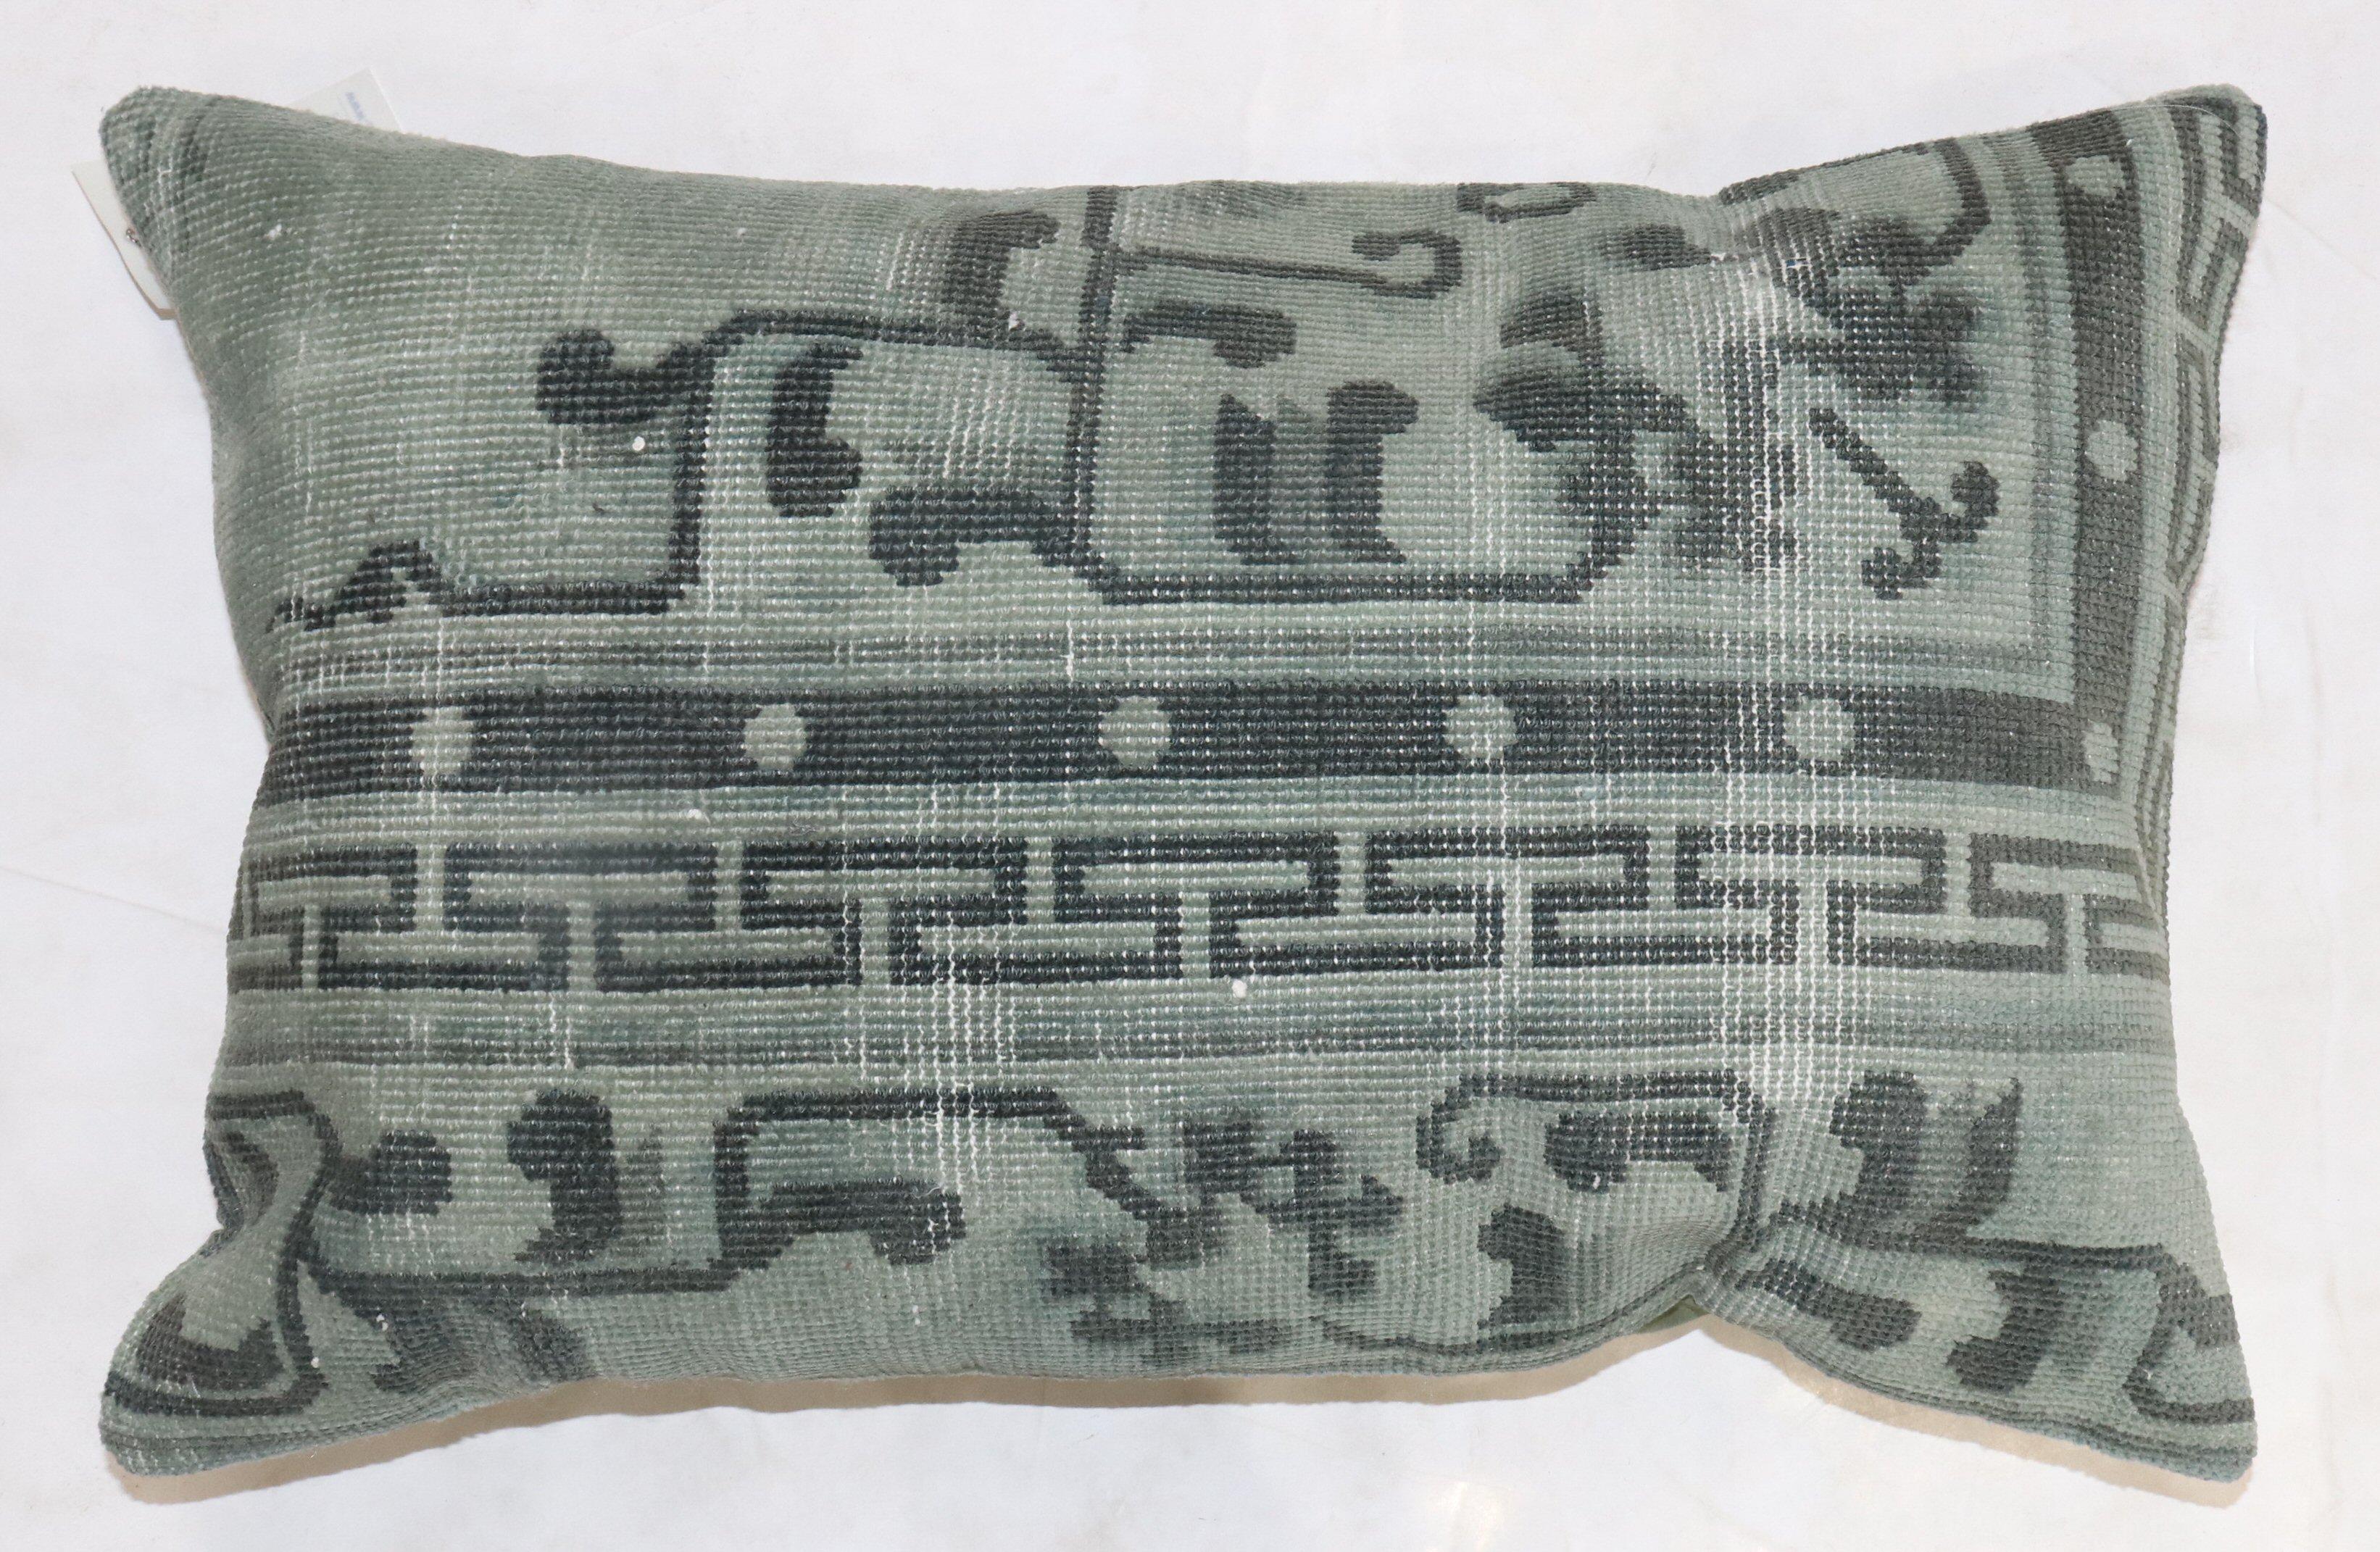 Pillow made from an old Chinese rug predominantly in green. zipper closure and polyfill provided

Measures: 16'' x 23''.